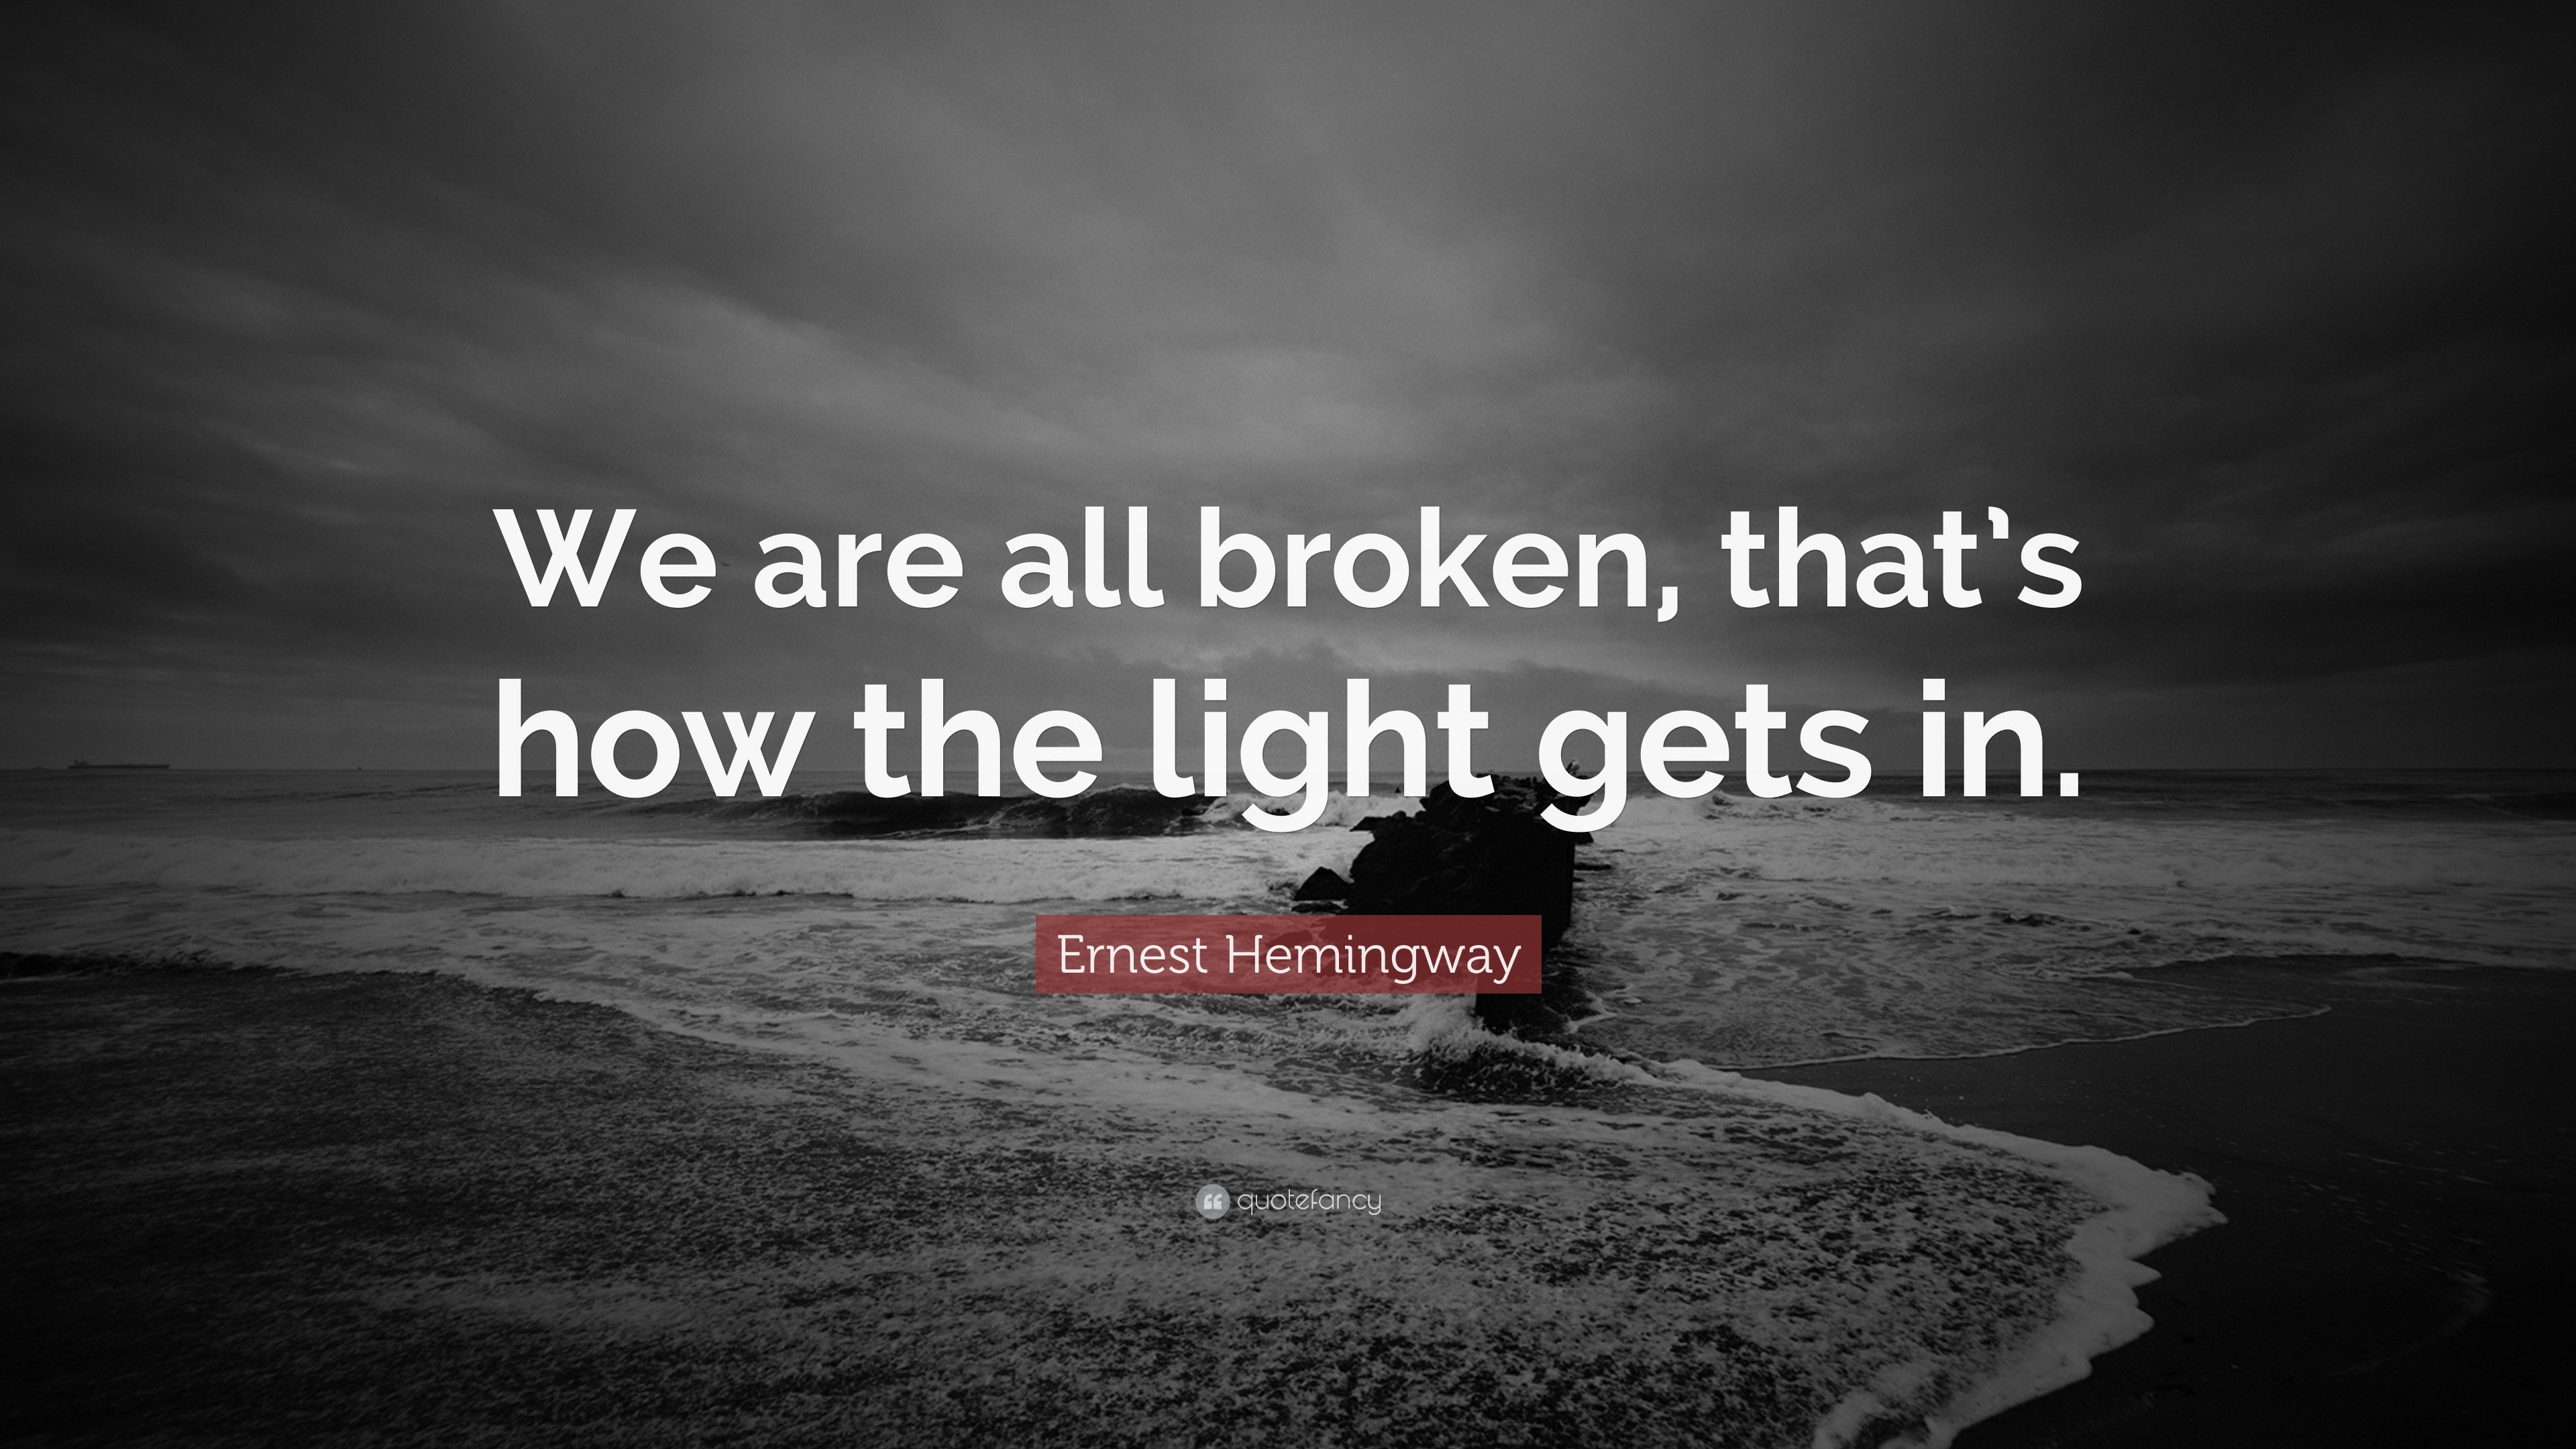 Ernest Hemingway “We are all that's how the gets in.”